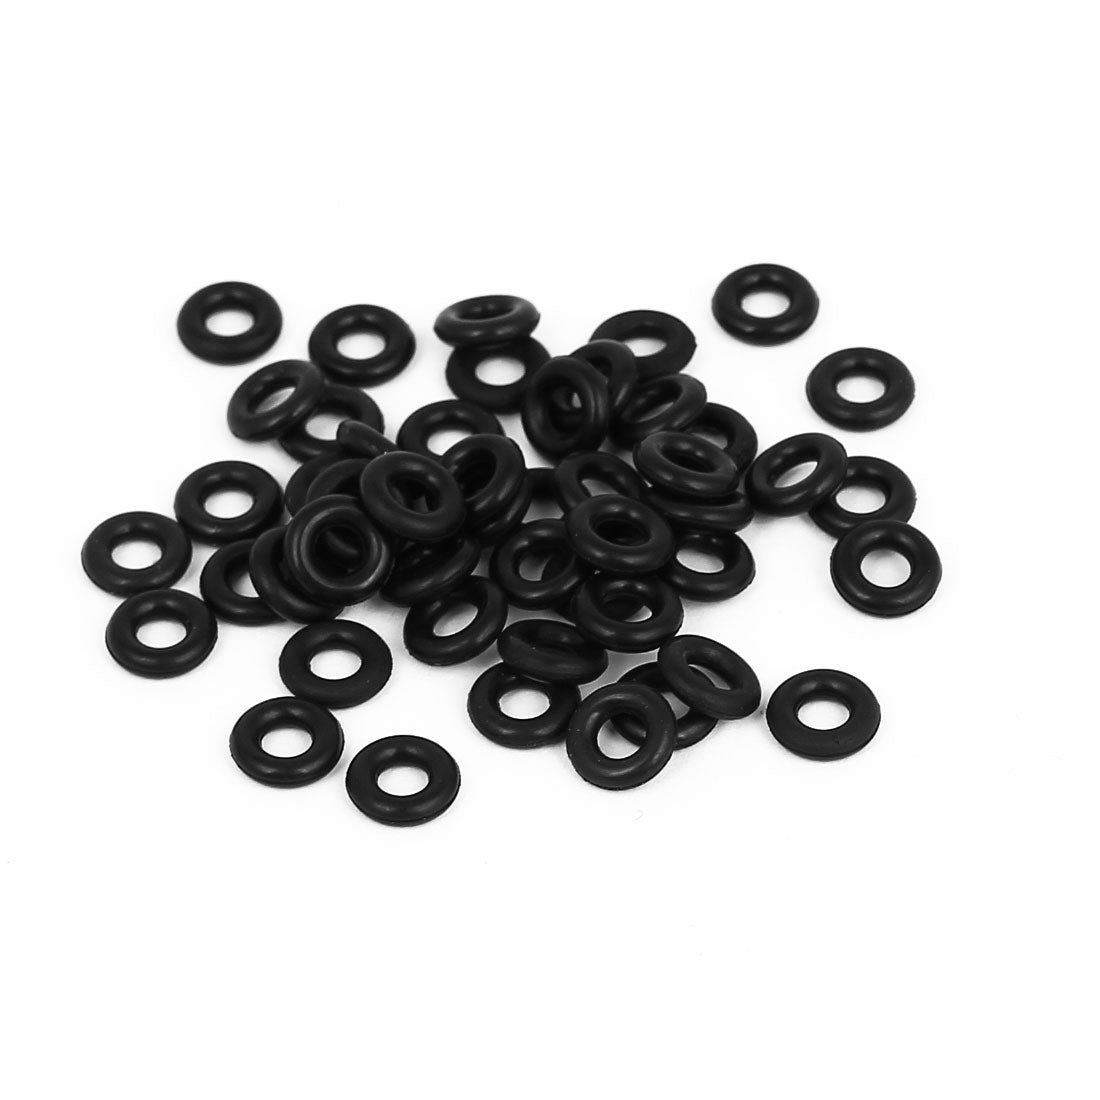 uxcell Uxcell 50 Pcs 7mmx3mmx2mm Black Rubber O Ring Oil Seal Gaskets